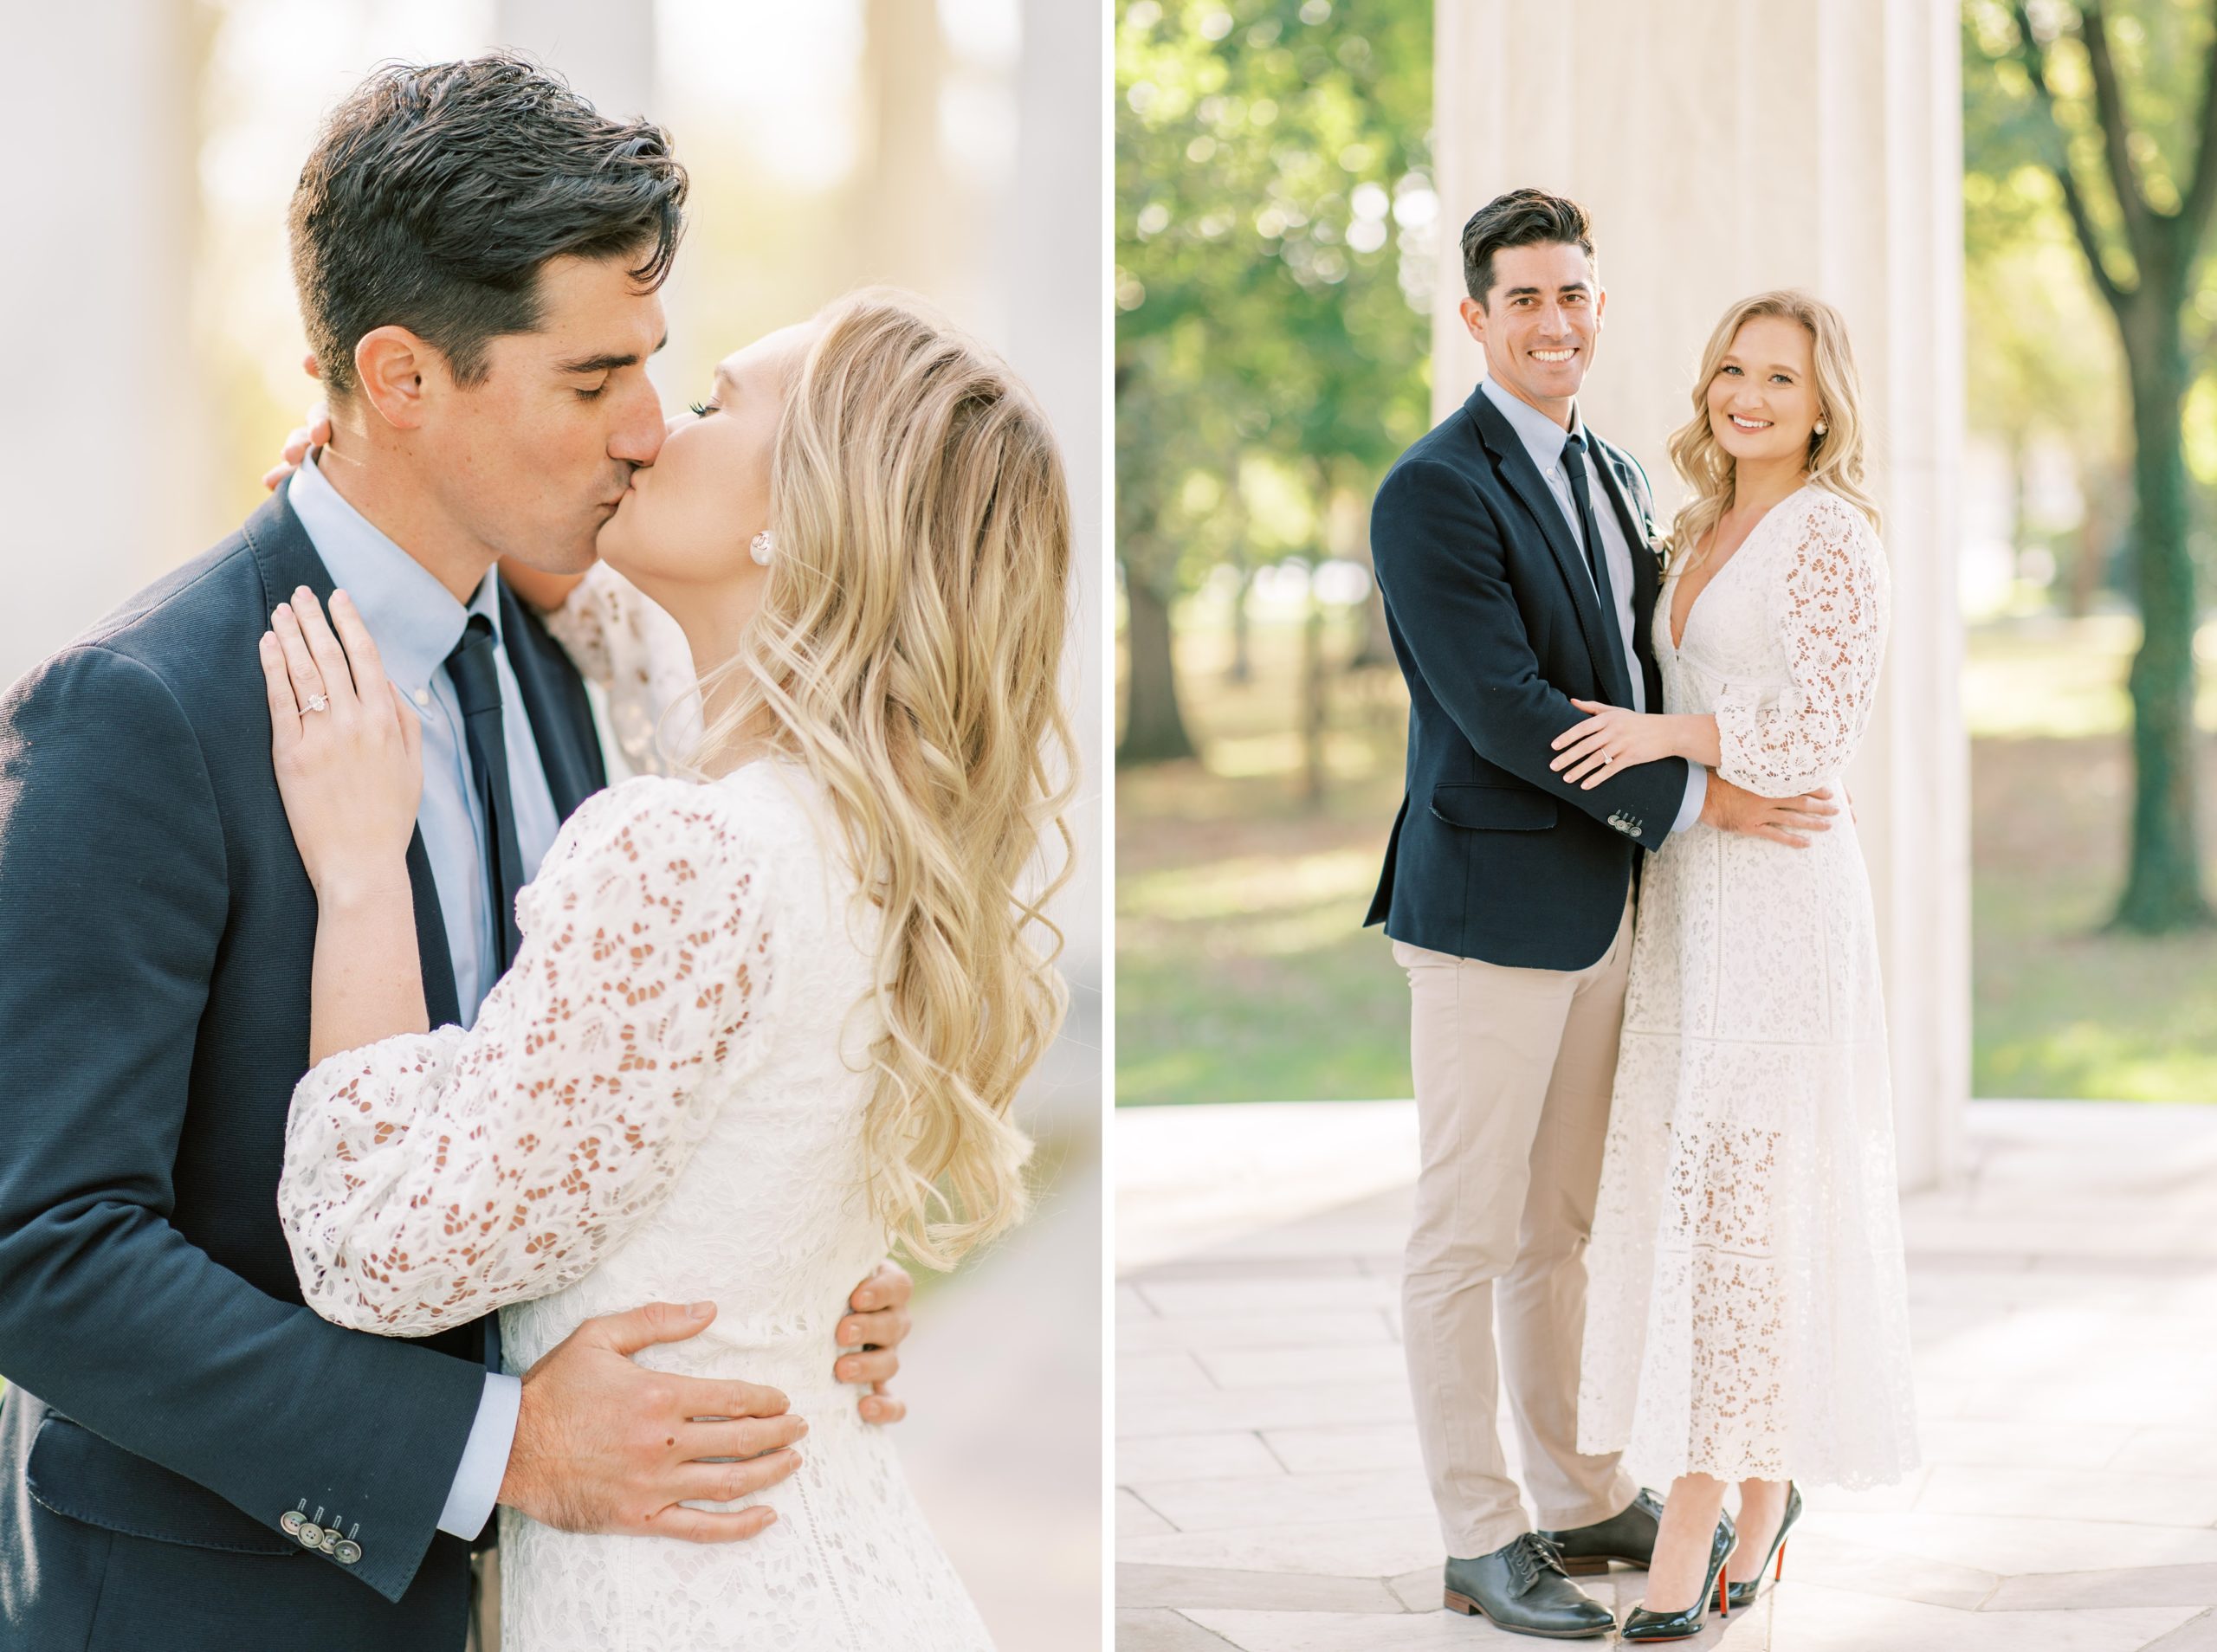 A romantic engagement session with a stylish couple at the Lincoln Memorial and DC War Memorial in Washington, DC.